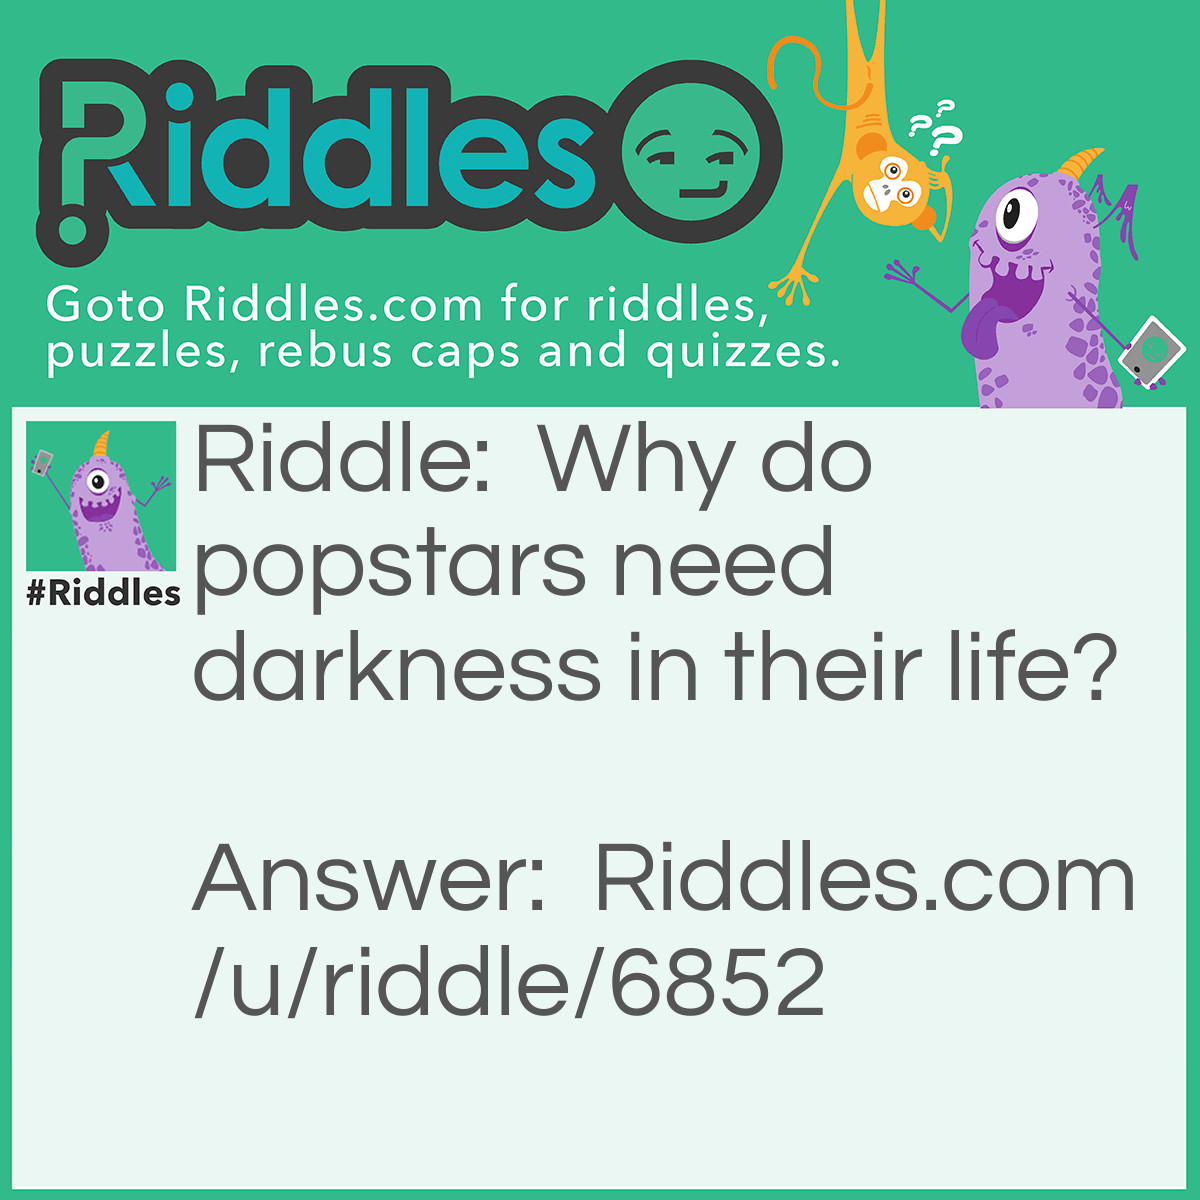 Riddle: Why do popstars need darkness in their life? Answer: Because stars can't shine without darkness.